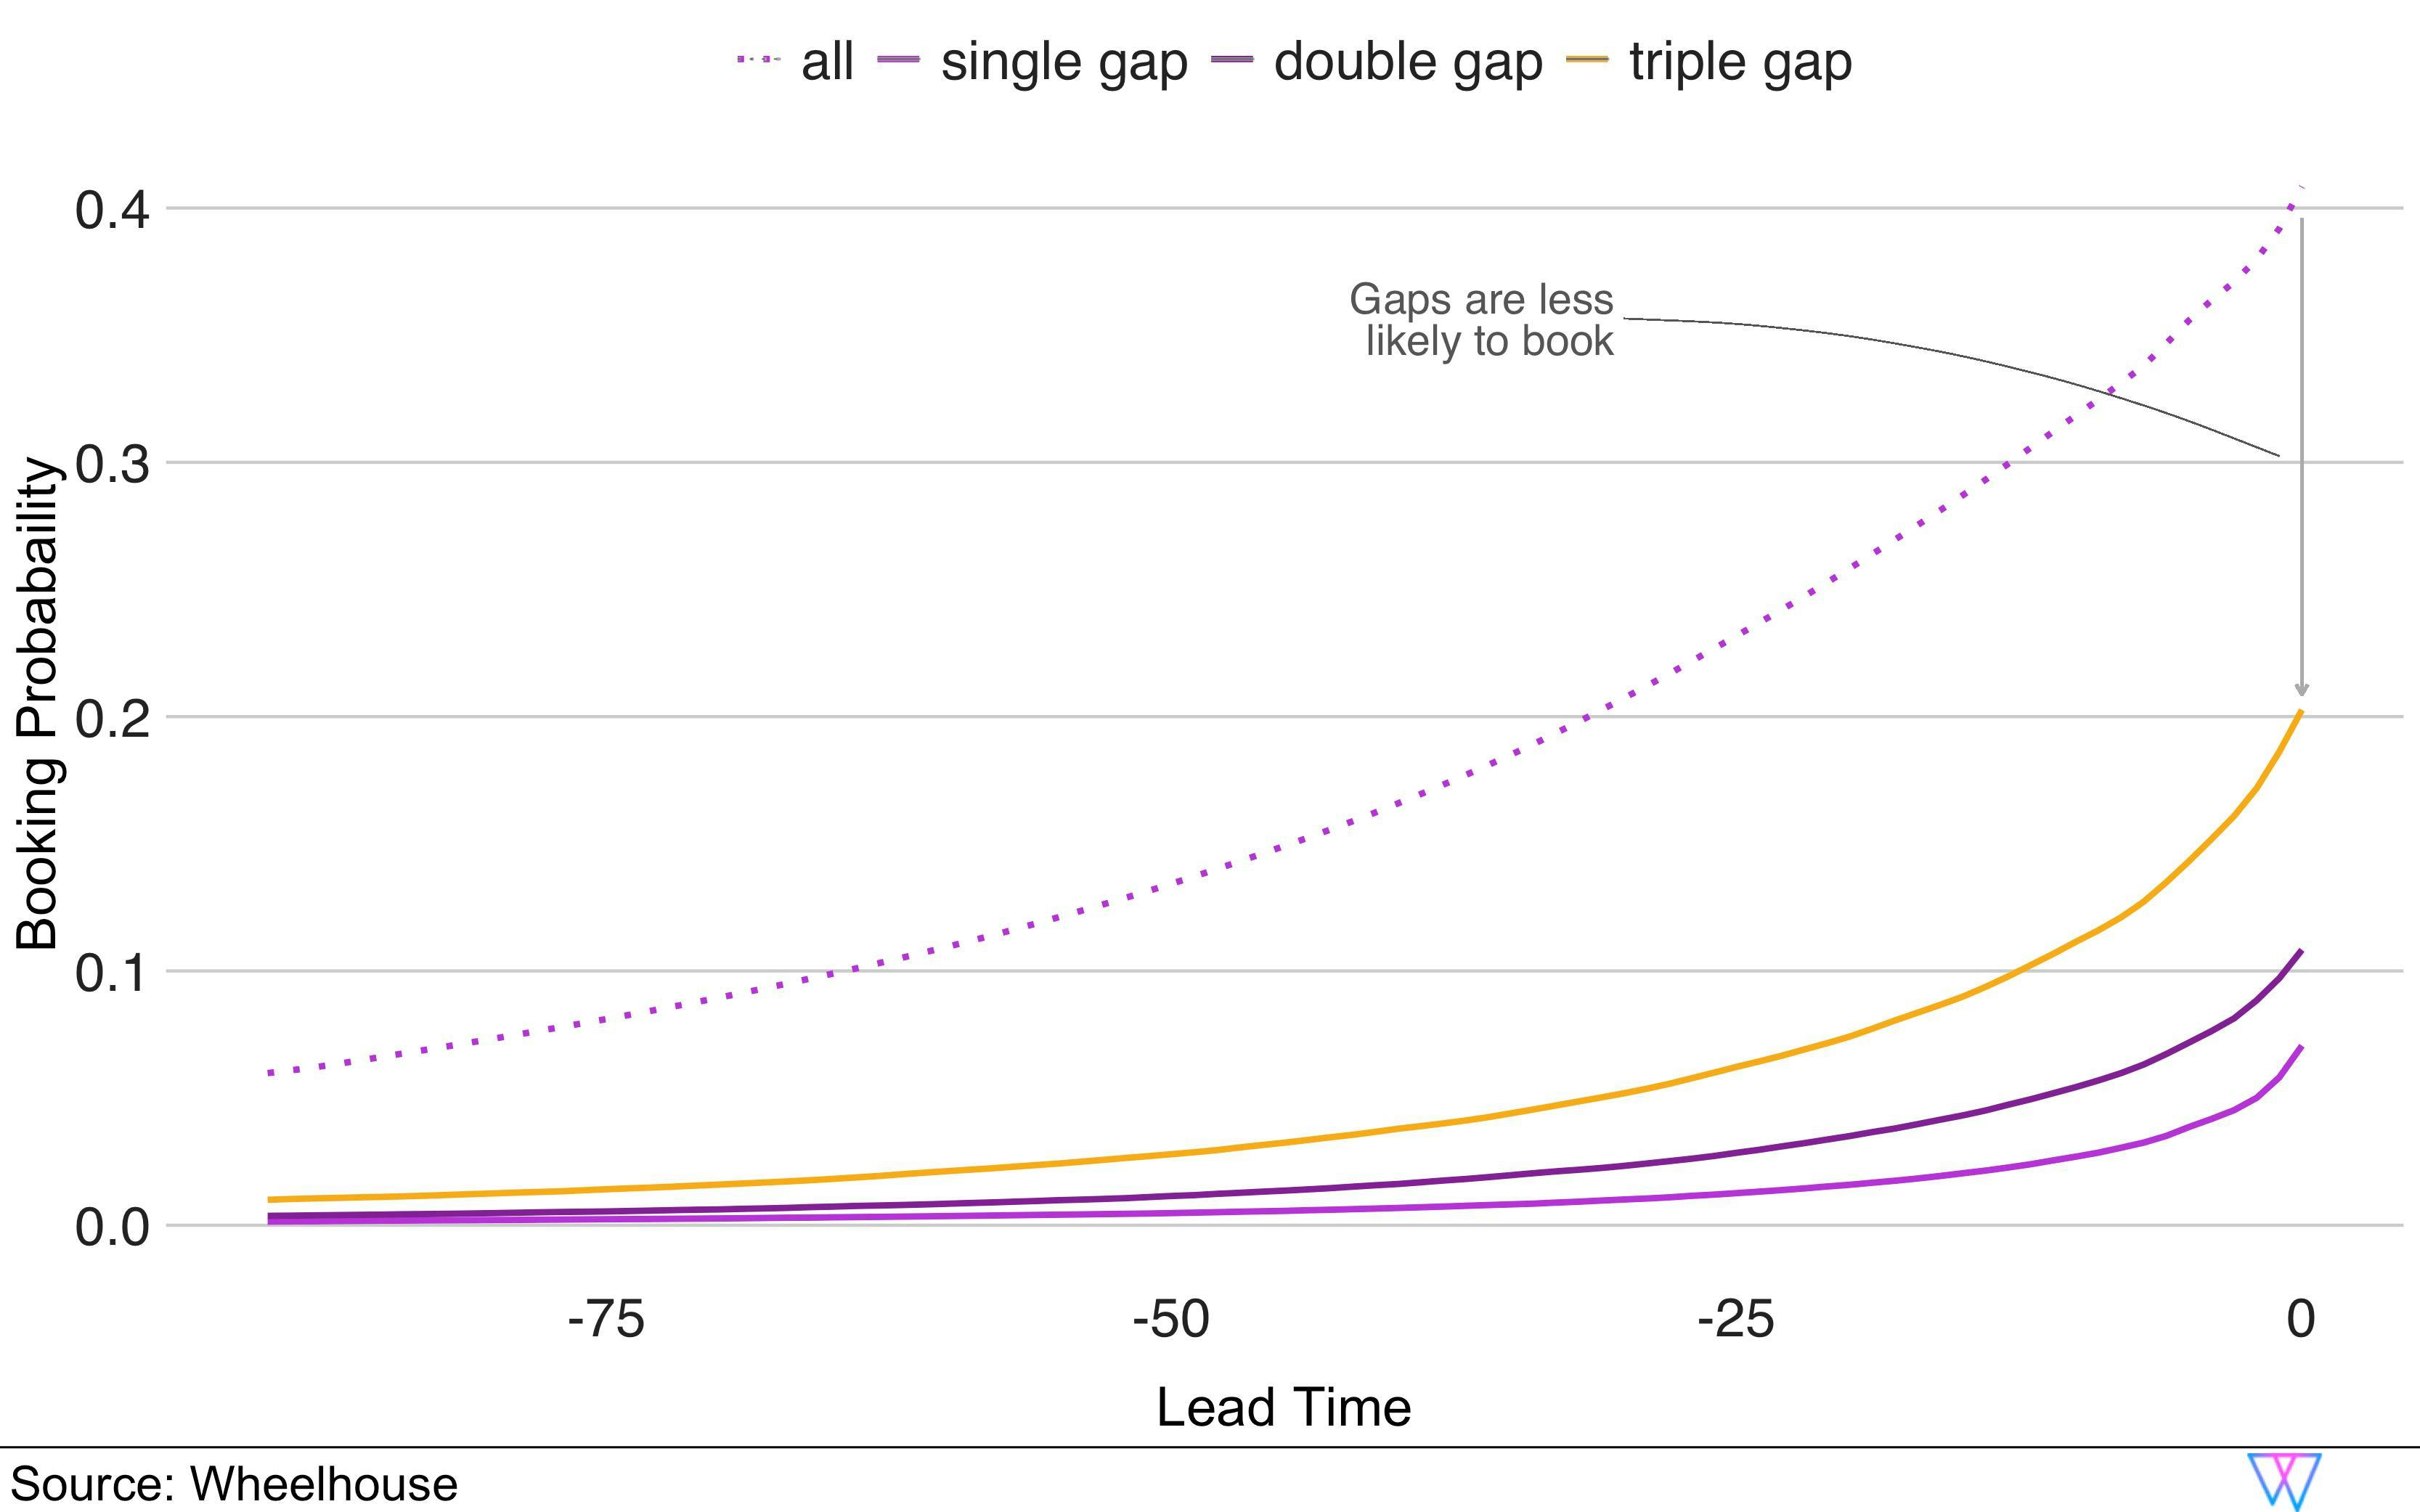 Booking probability by lead time covering all, single, double and triple gaps